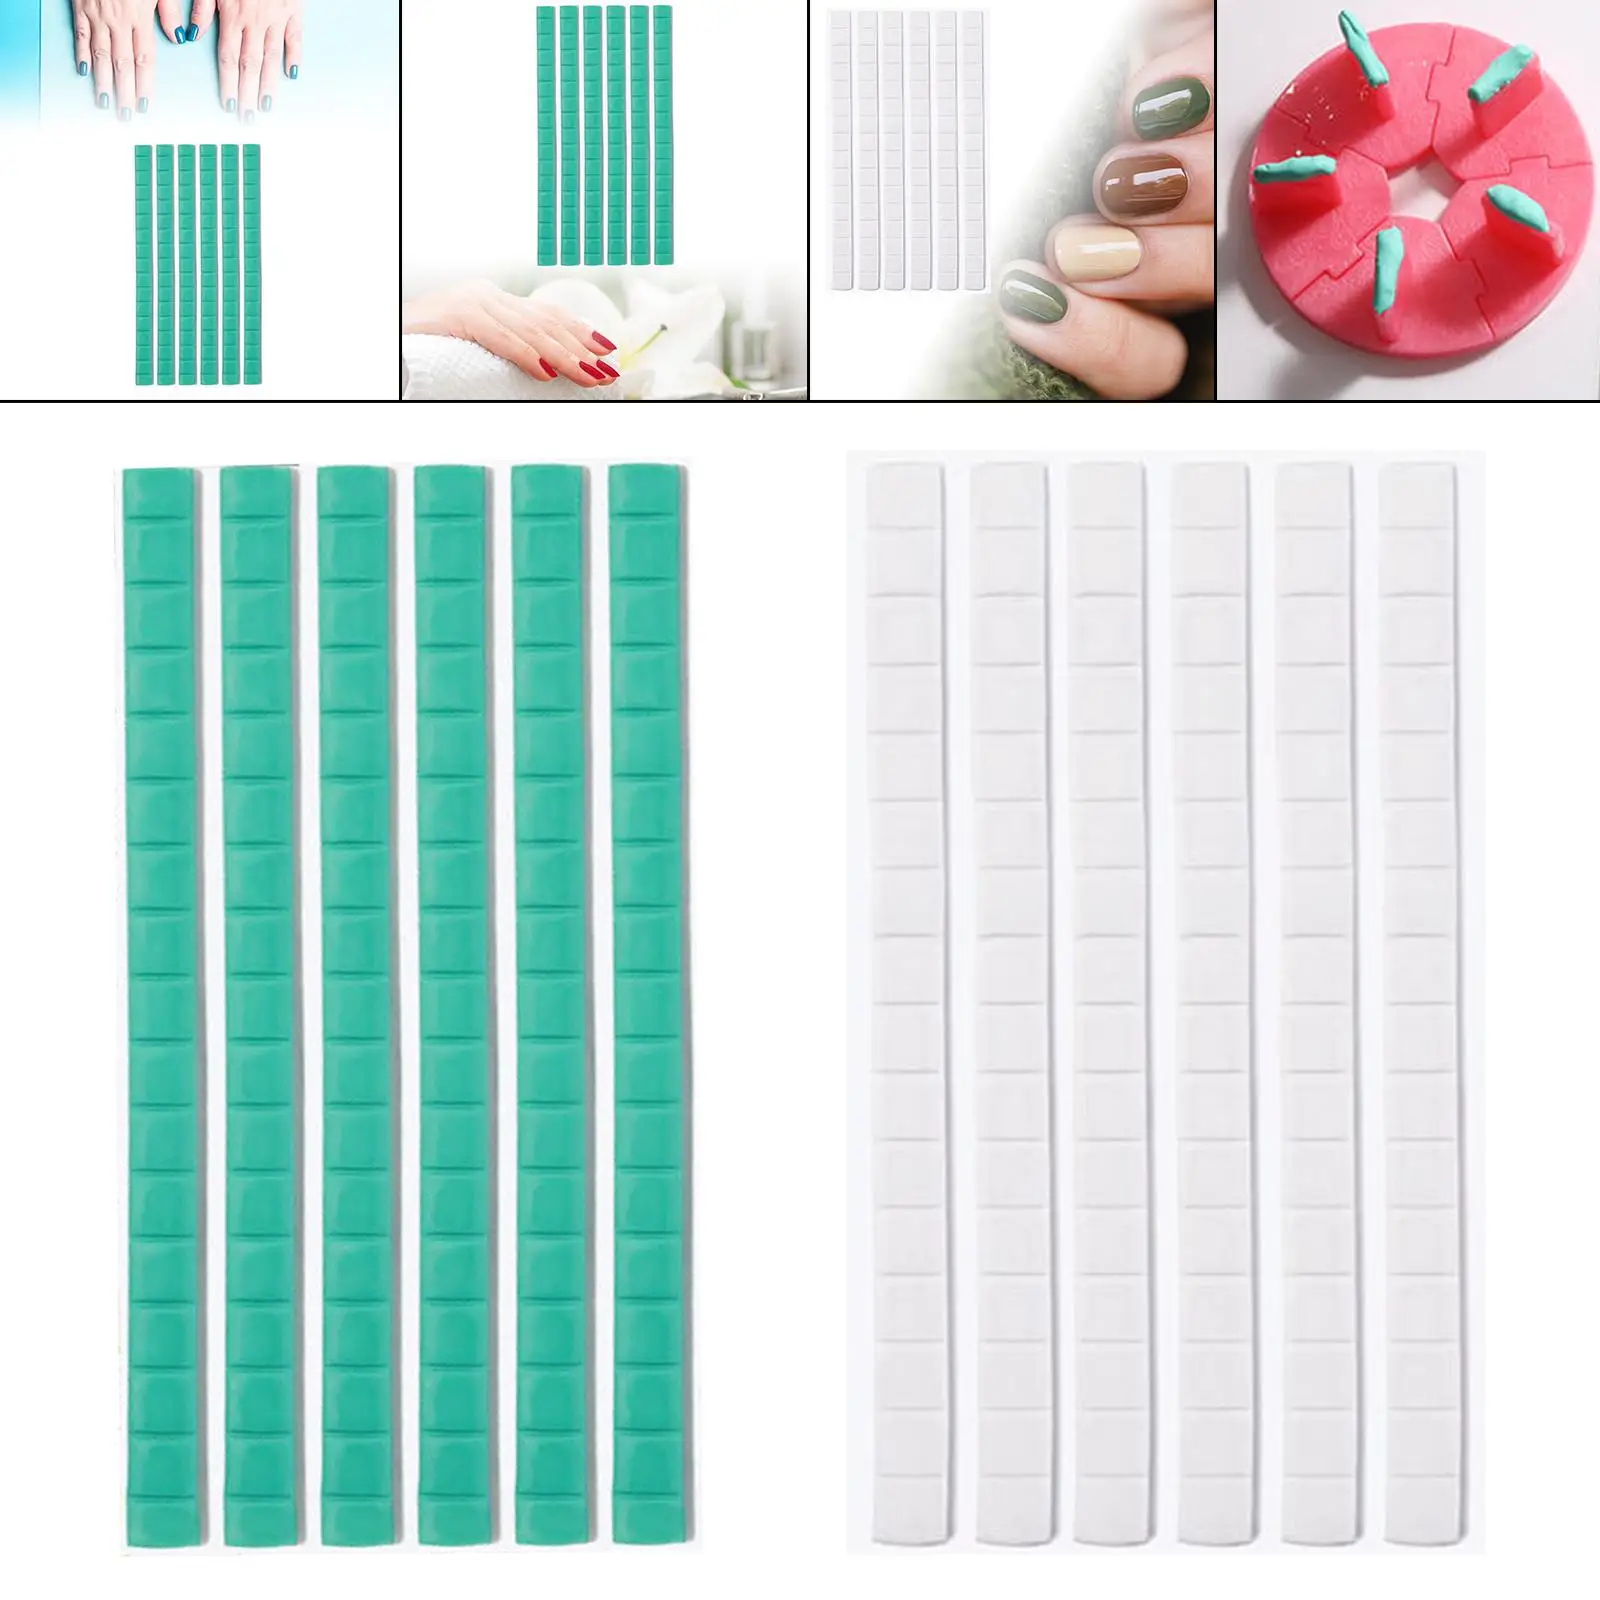 90x Nail Adhesive Glue Stand Holder Non Stick Hand Practice Tools